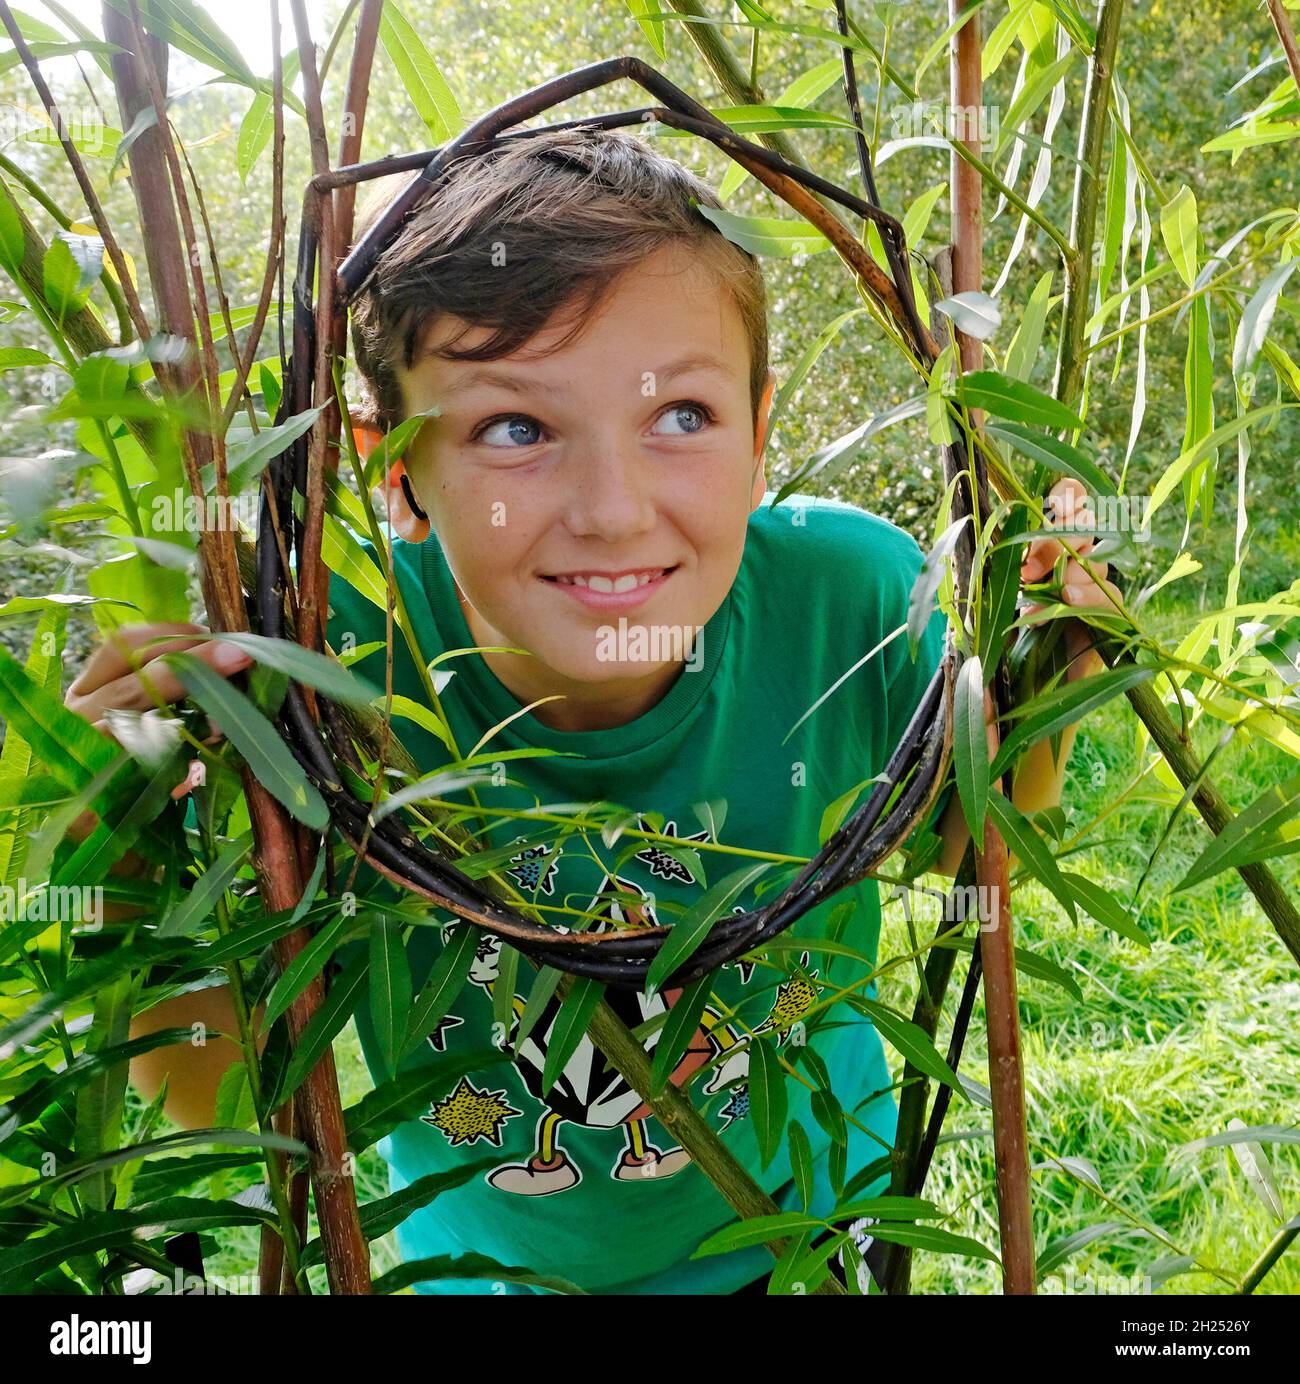 Young smiling happy boy wearing green t shirt looking up through a hole window made with branches of a woven garden structure Wales UK  KATHY DEWITT Stock Photo